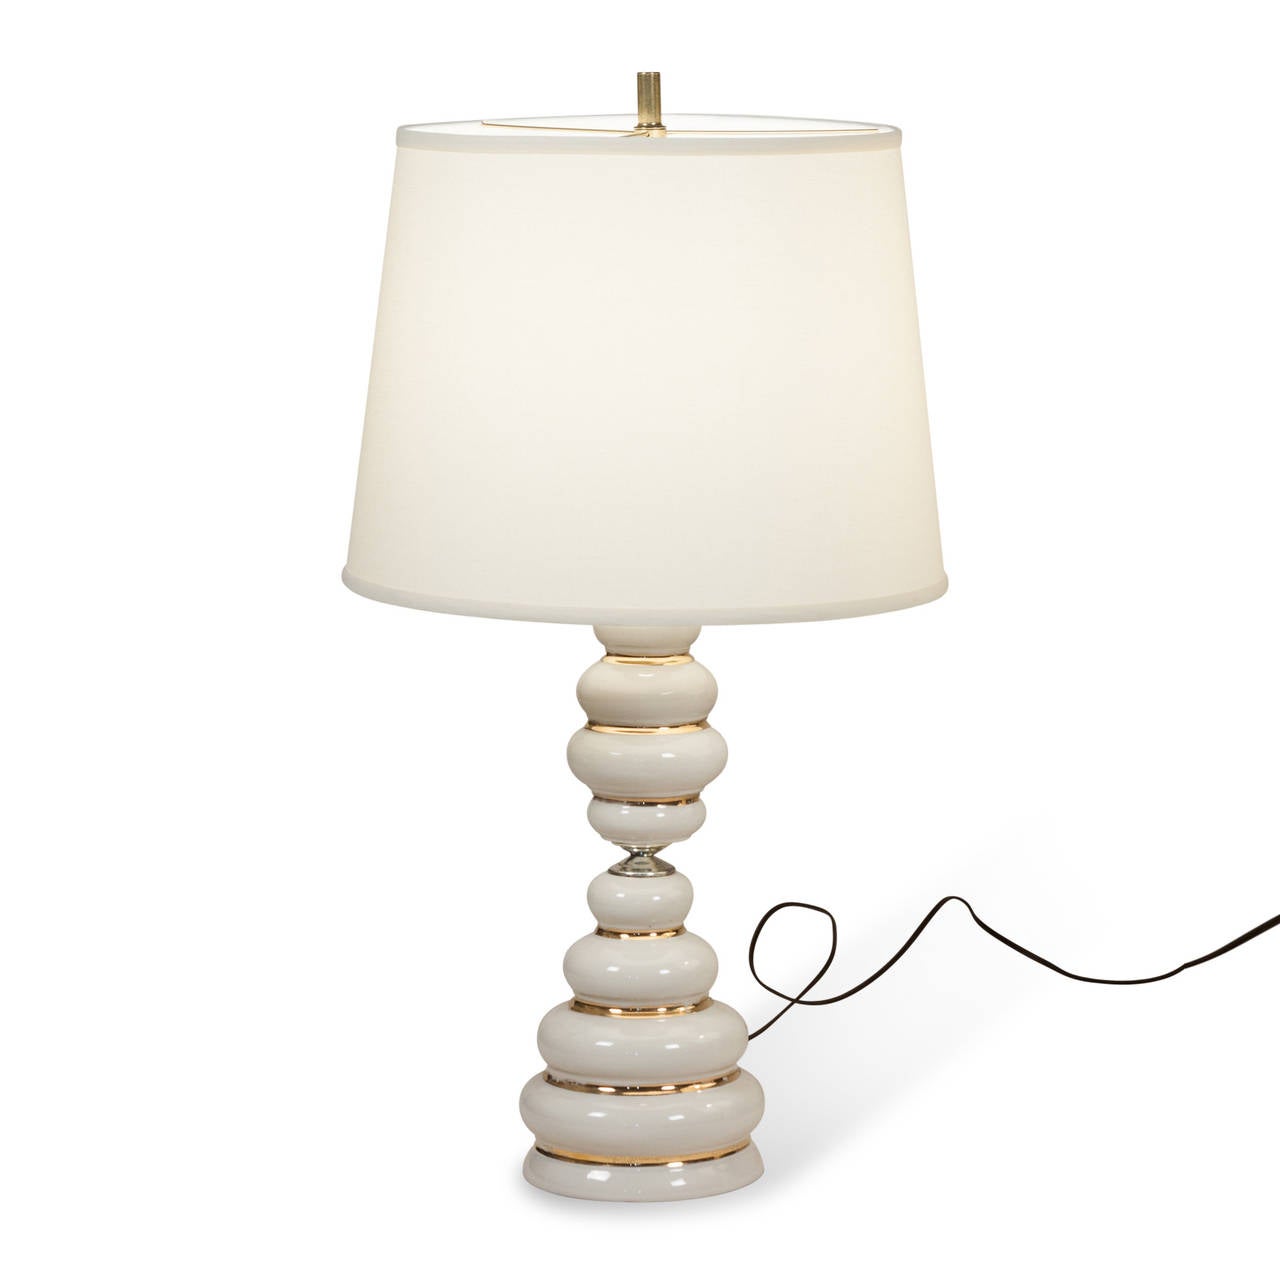 American Pair of Stacked Ceramic Table Lamps